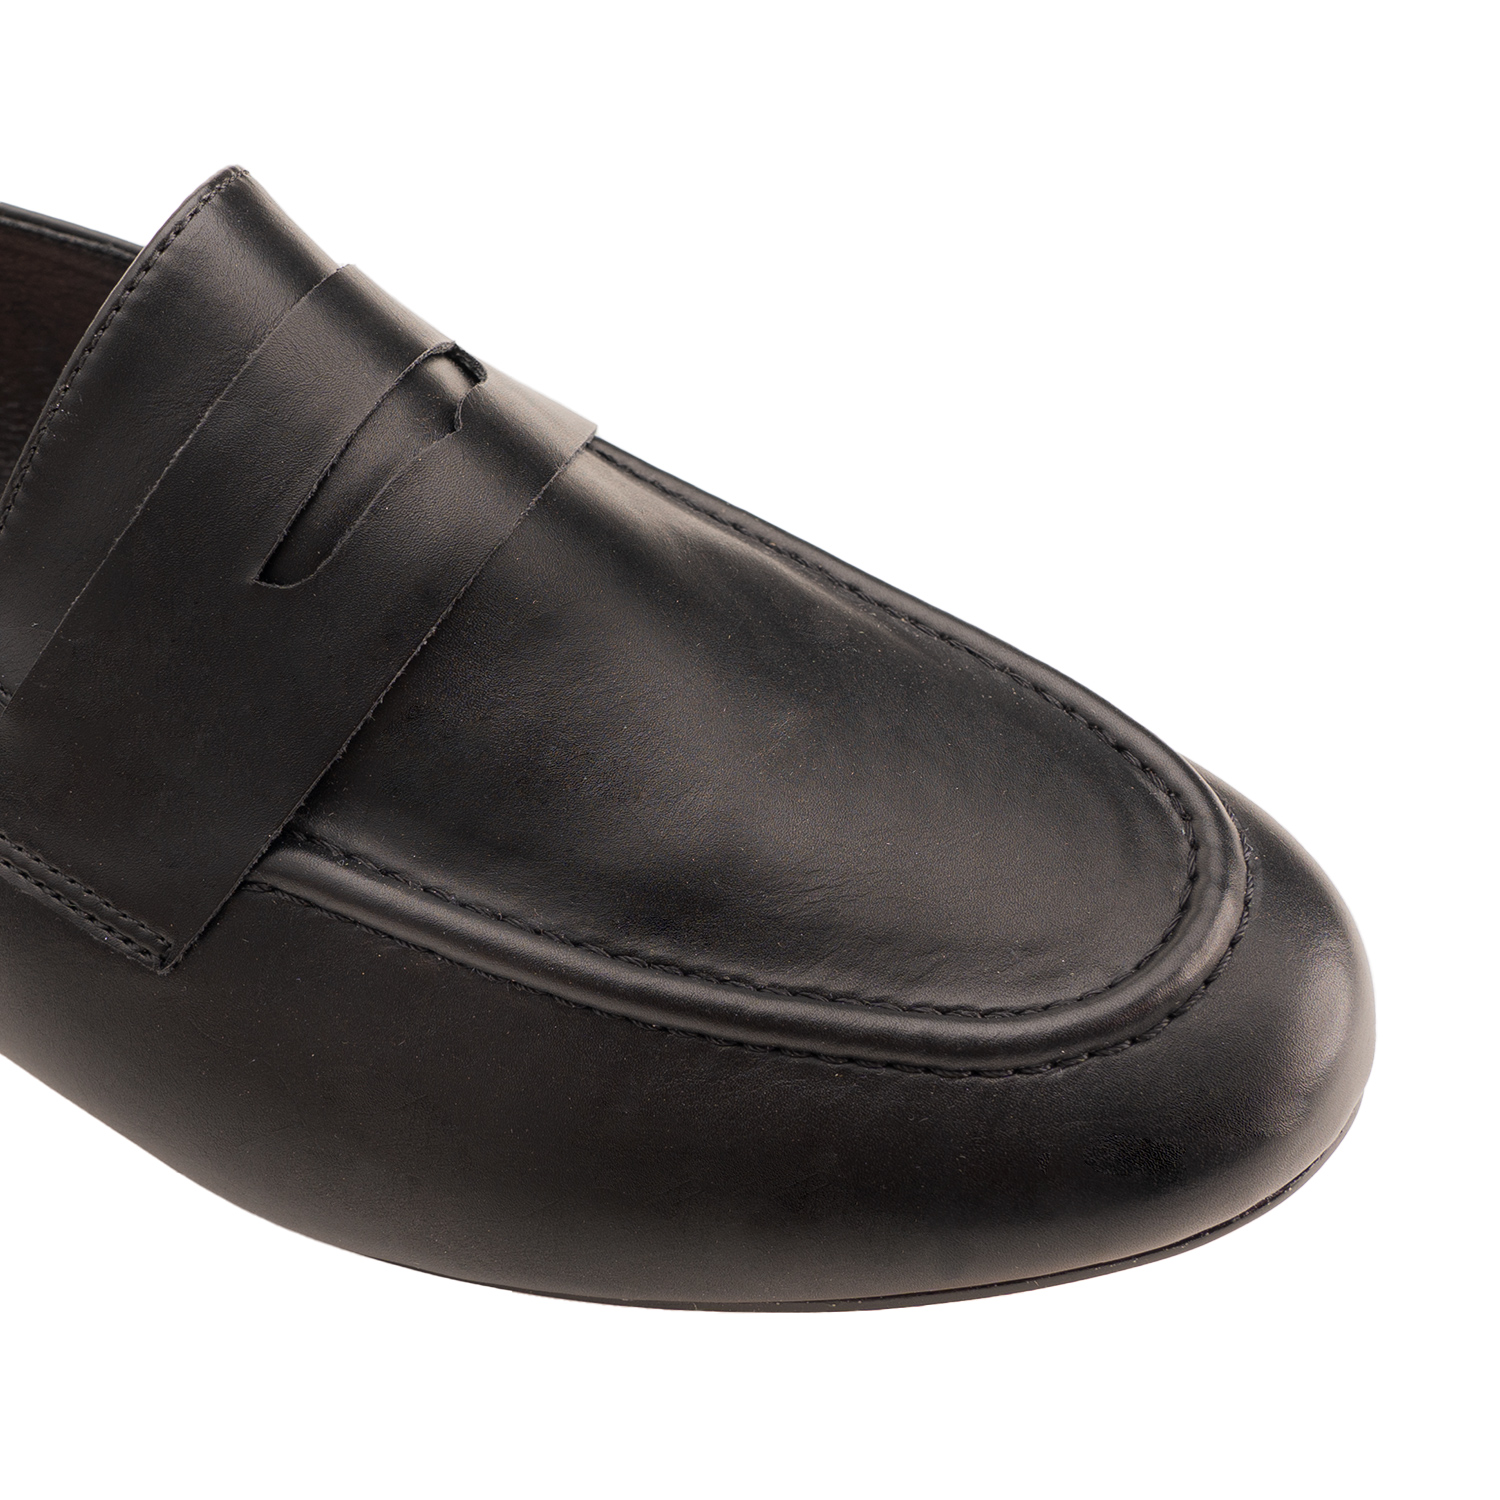 Penny loafer in black faux leather 